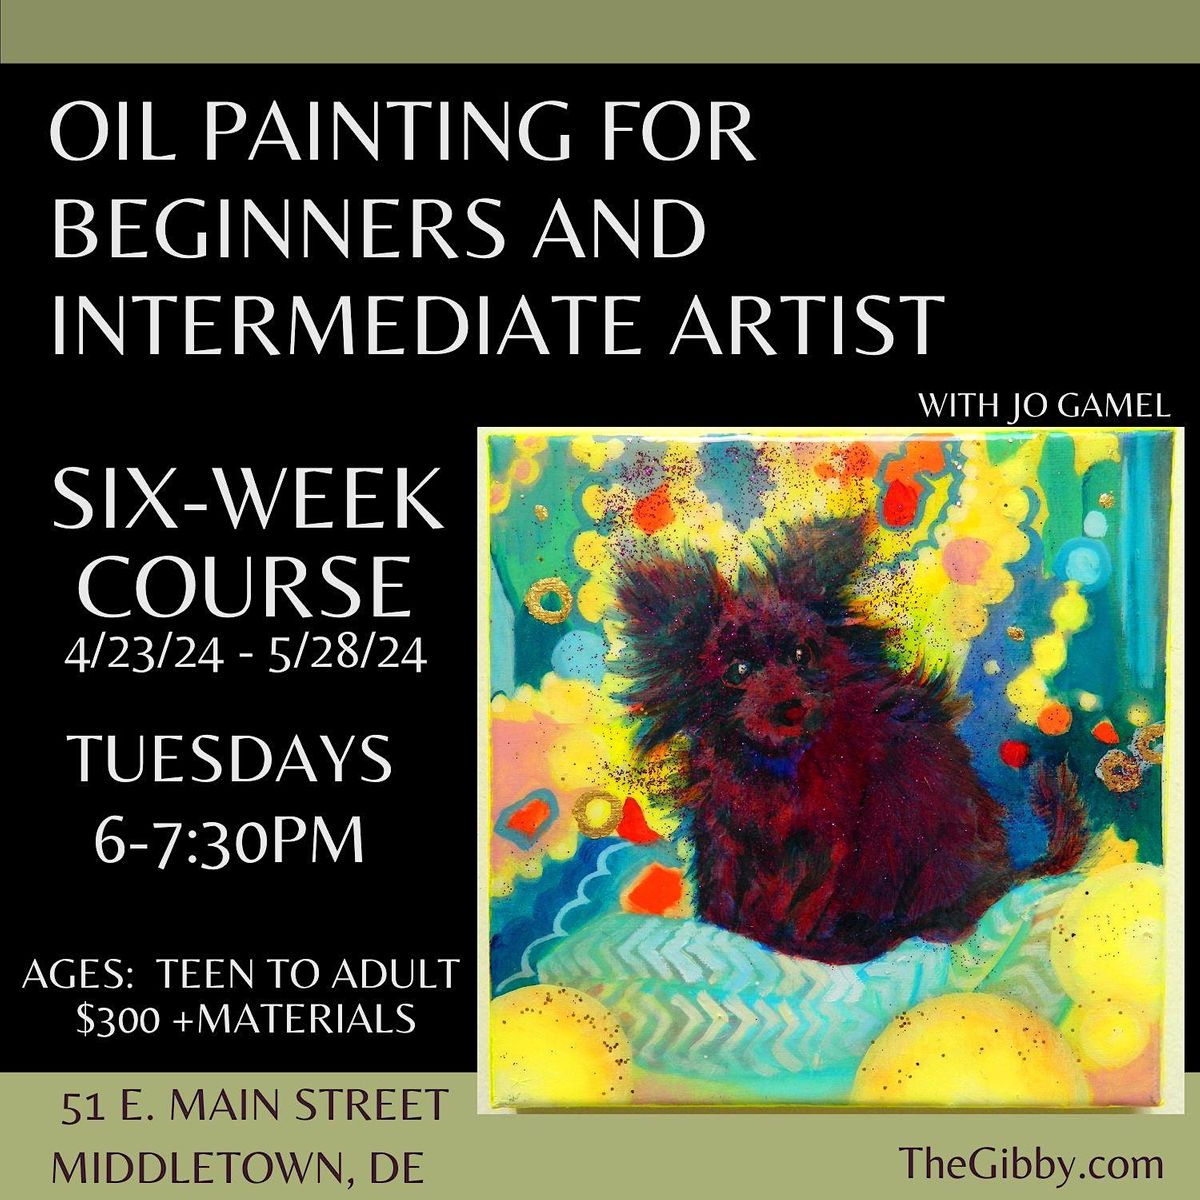 Oil Painting for Beginners and Intermediate